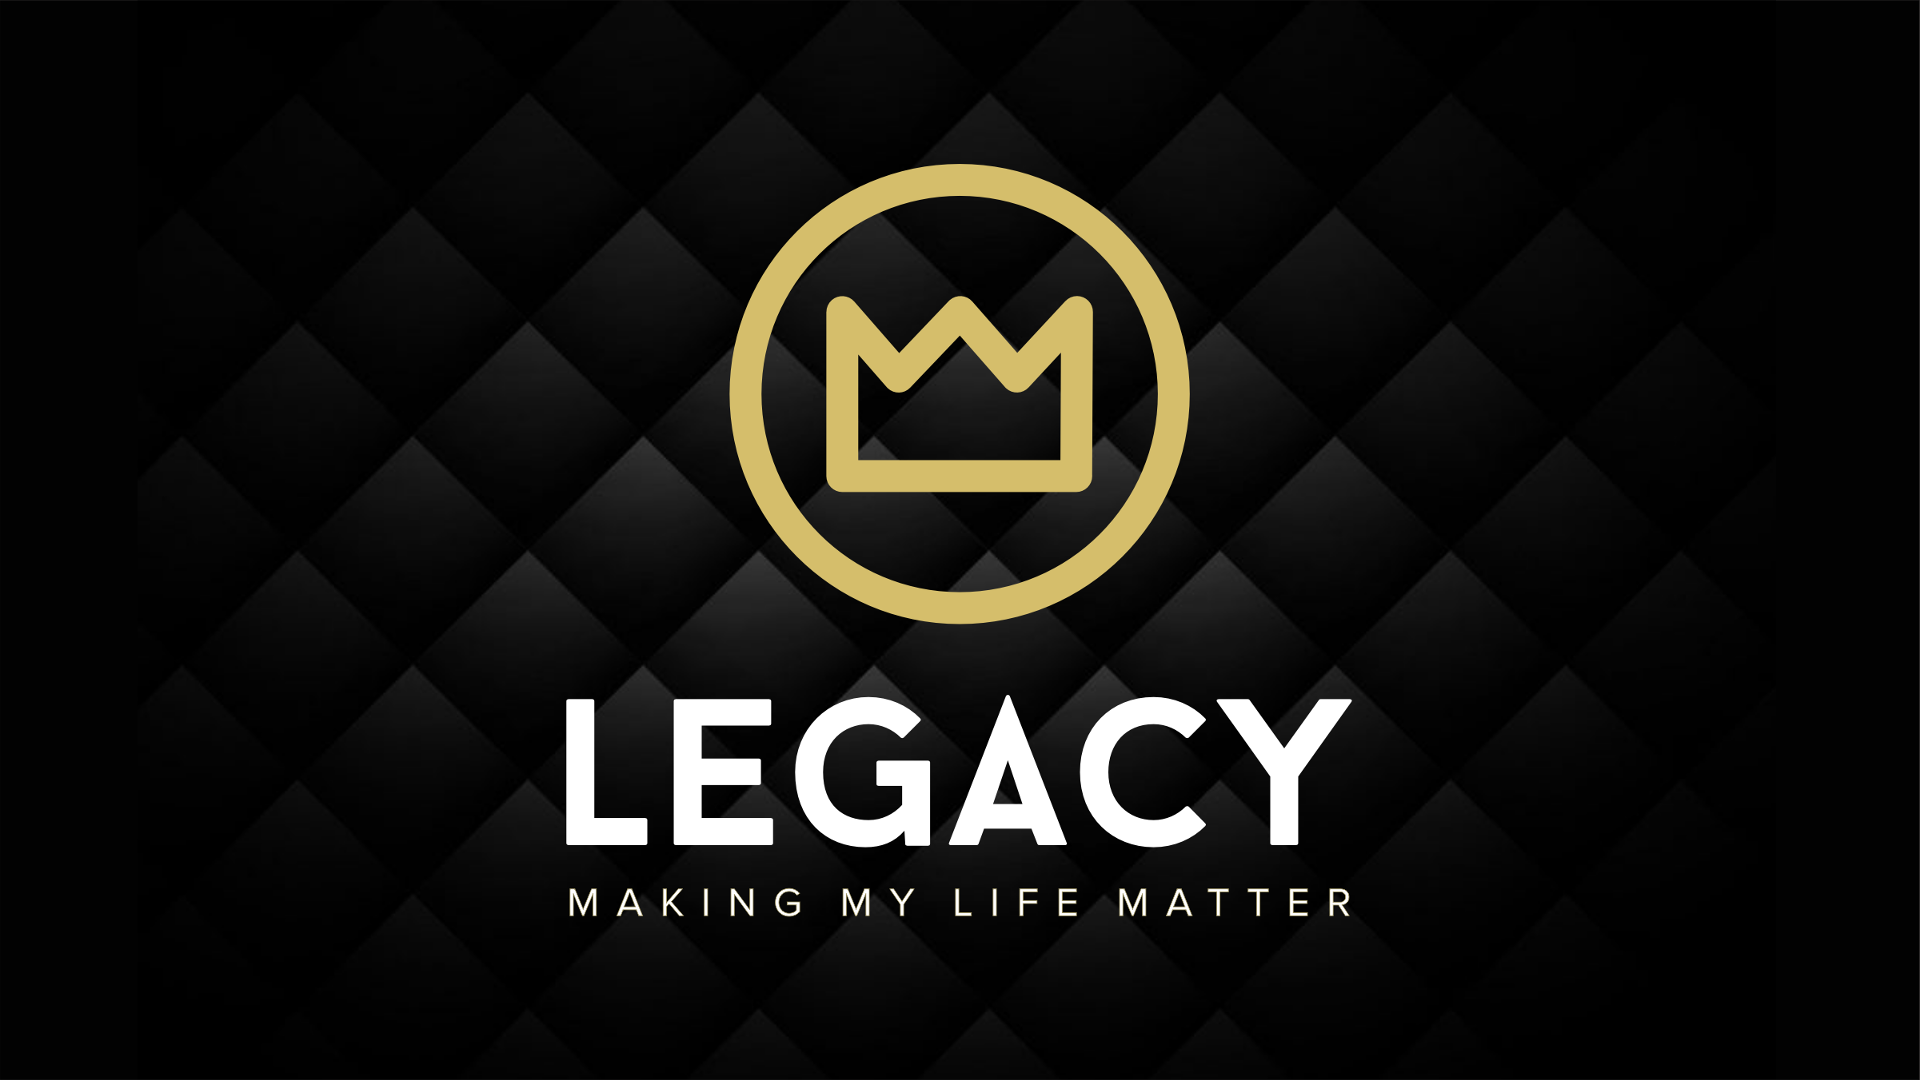 LEGACY – HOW TO LEAVE A LEGACY